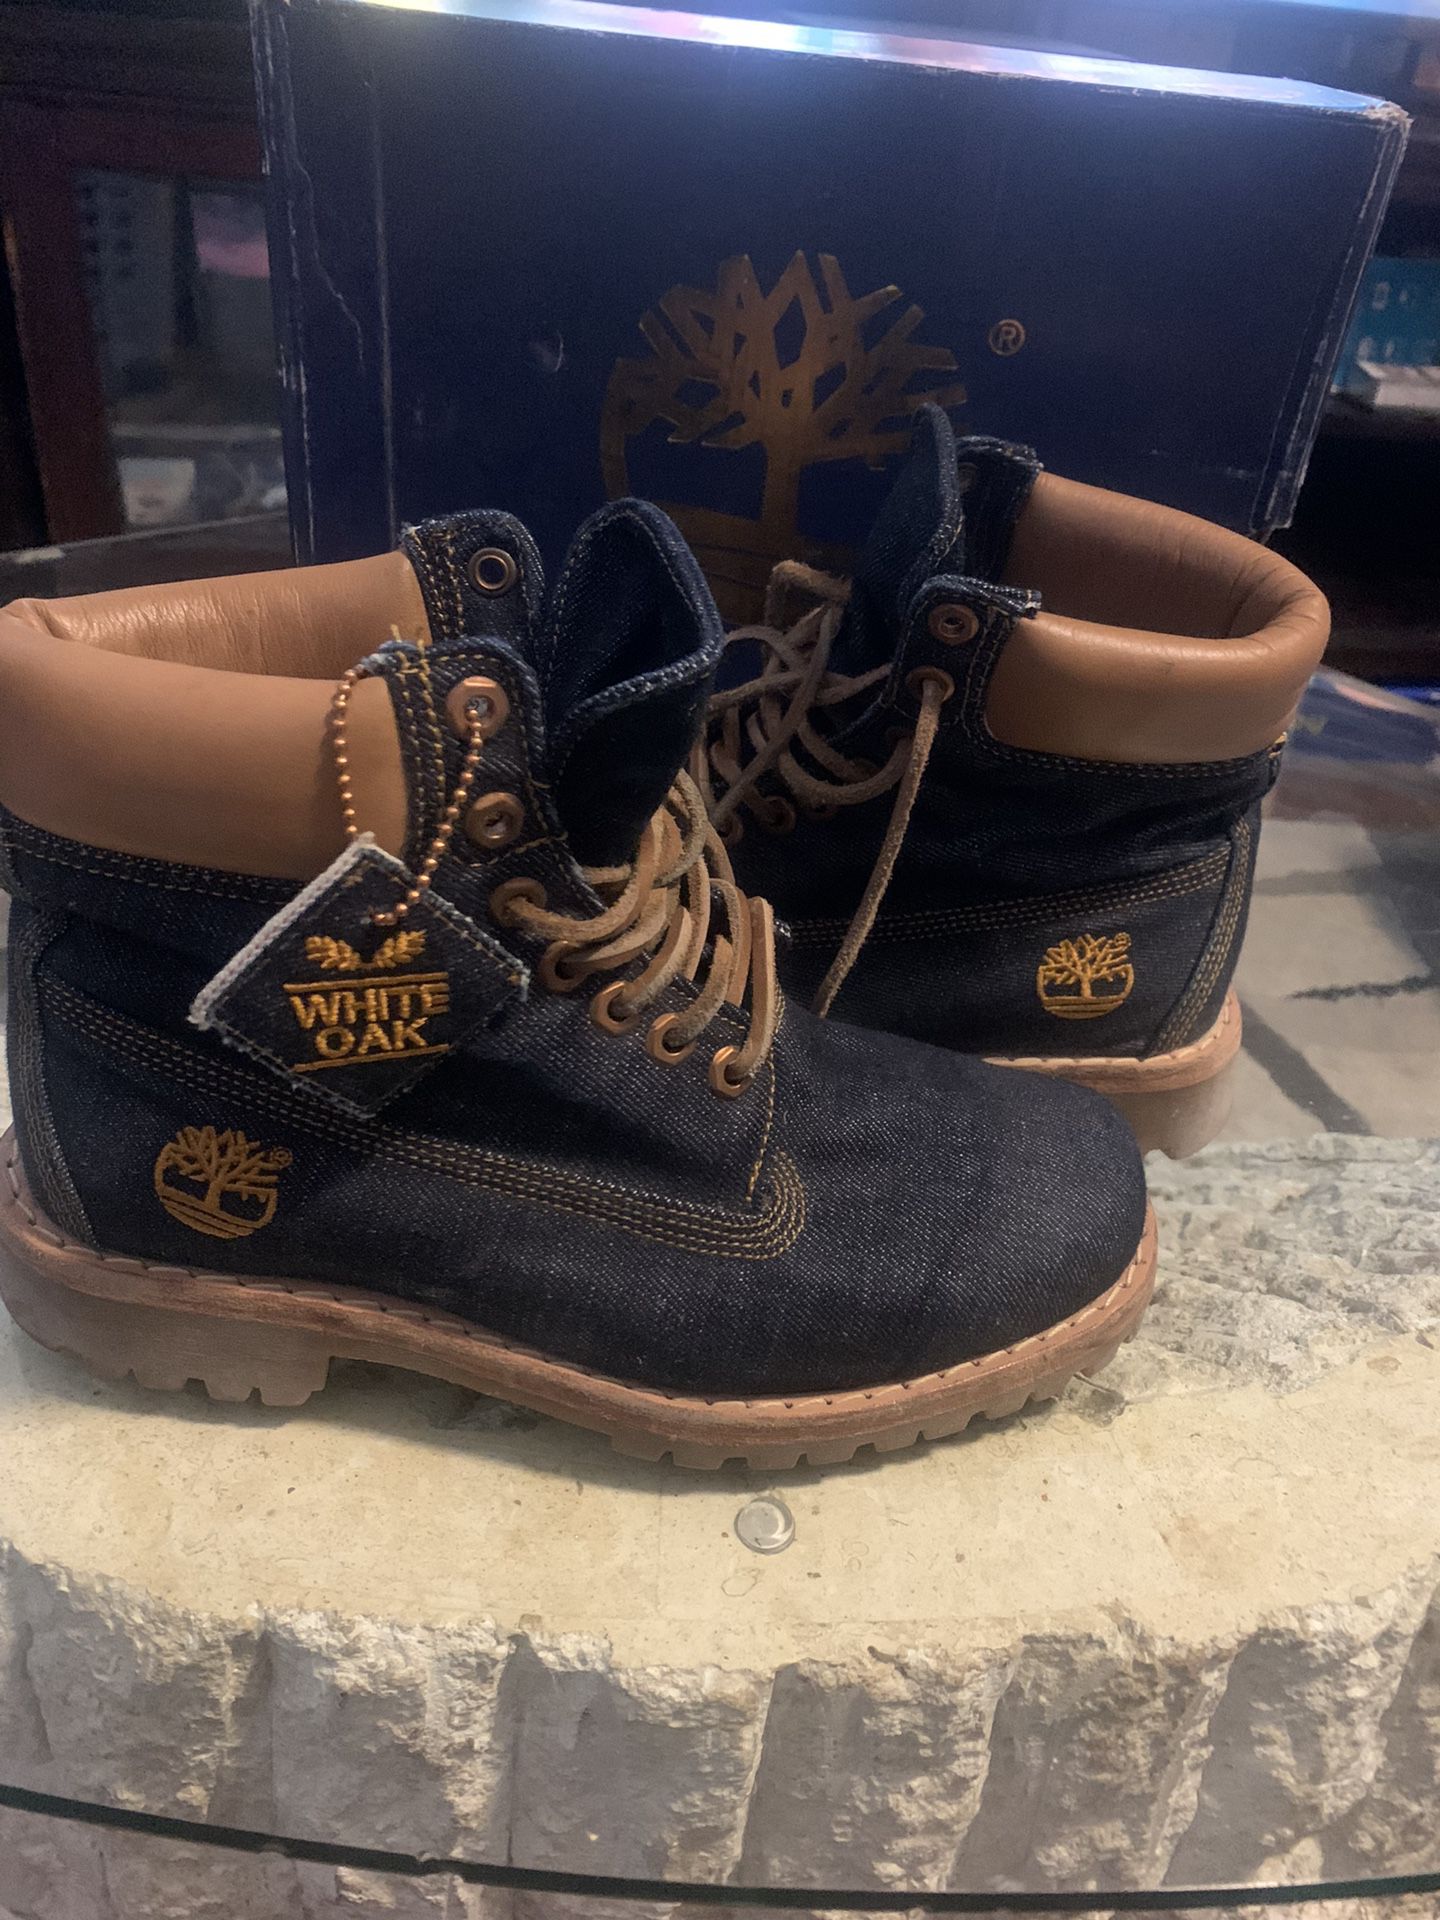 Timberland boot Size 7m In Men